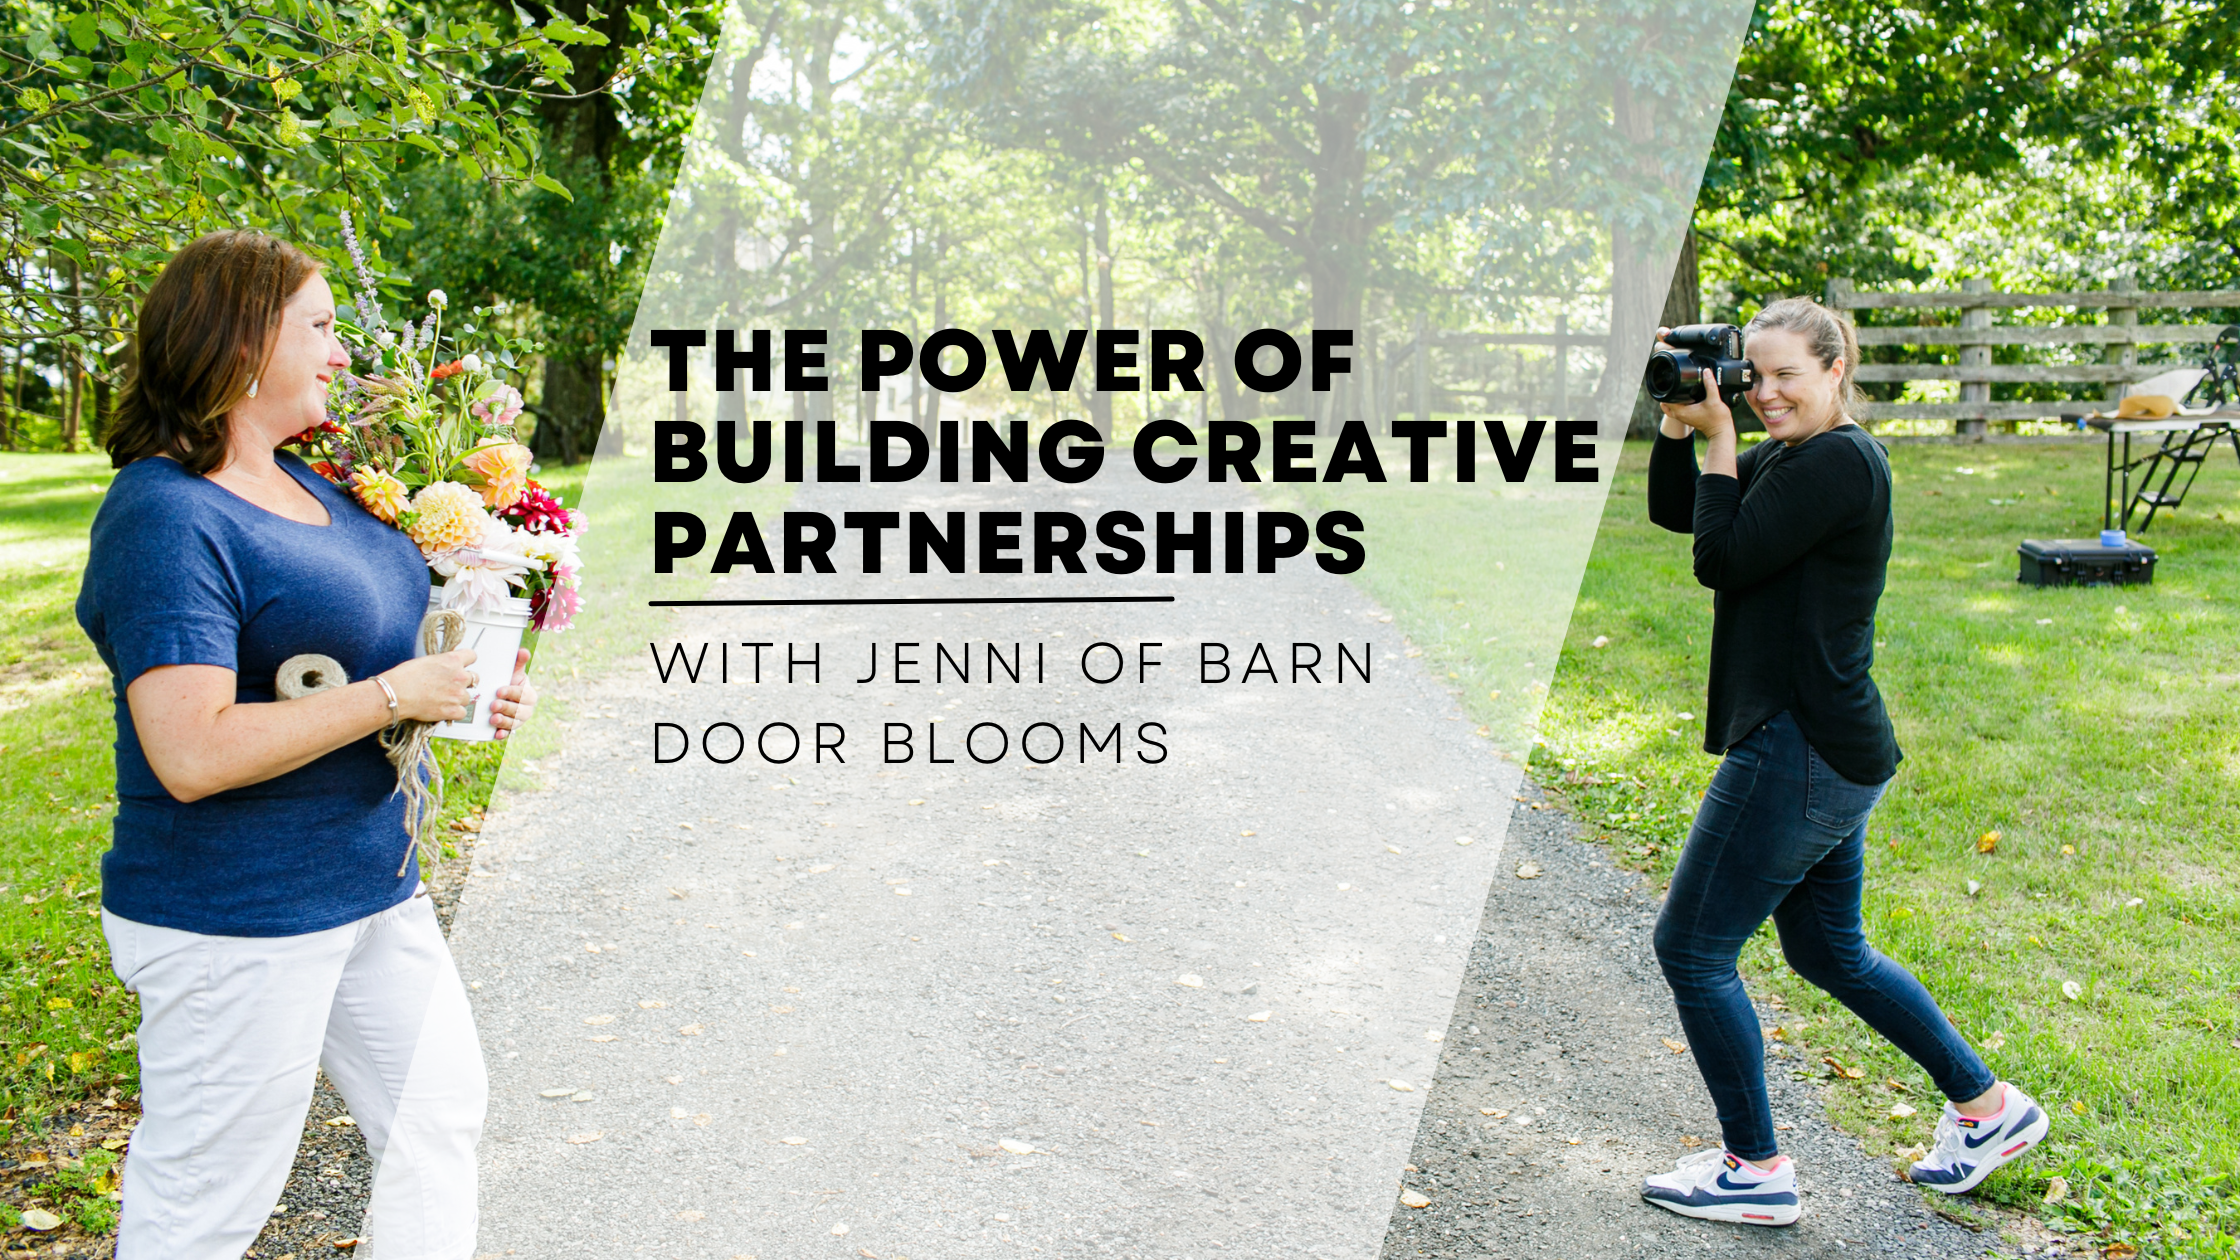 The Power of Building creative partnership with Jenni of barn door blooms